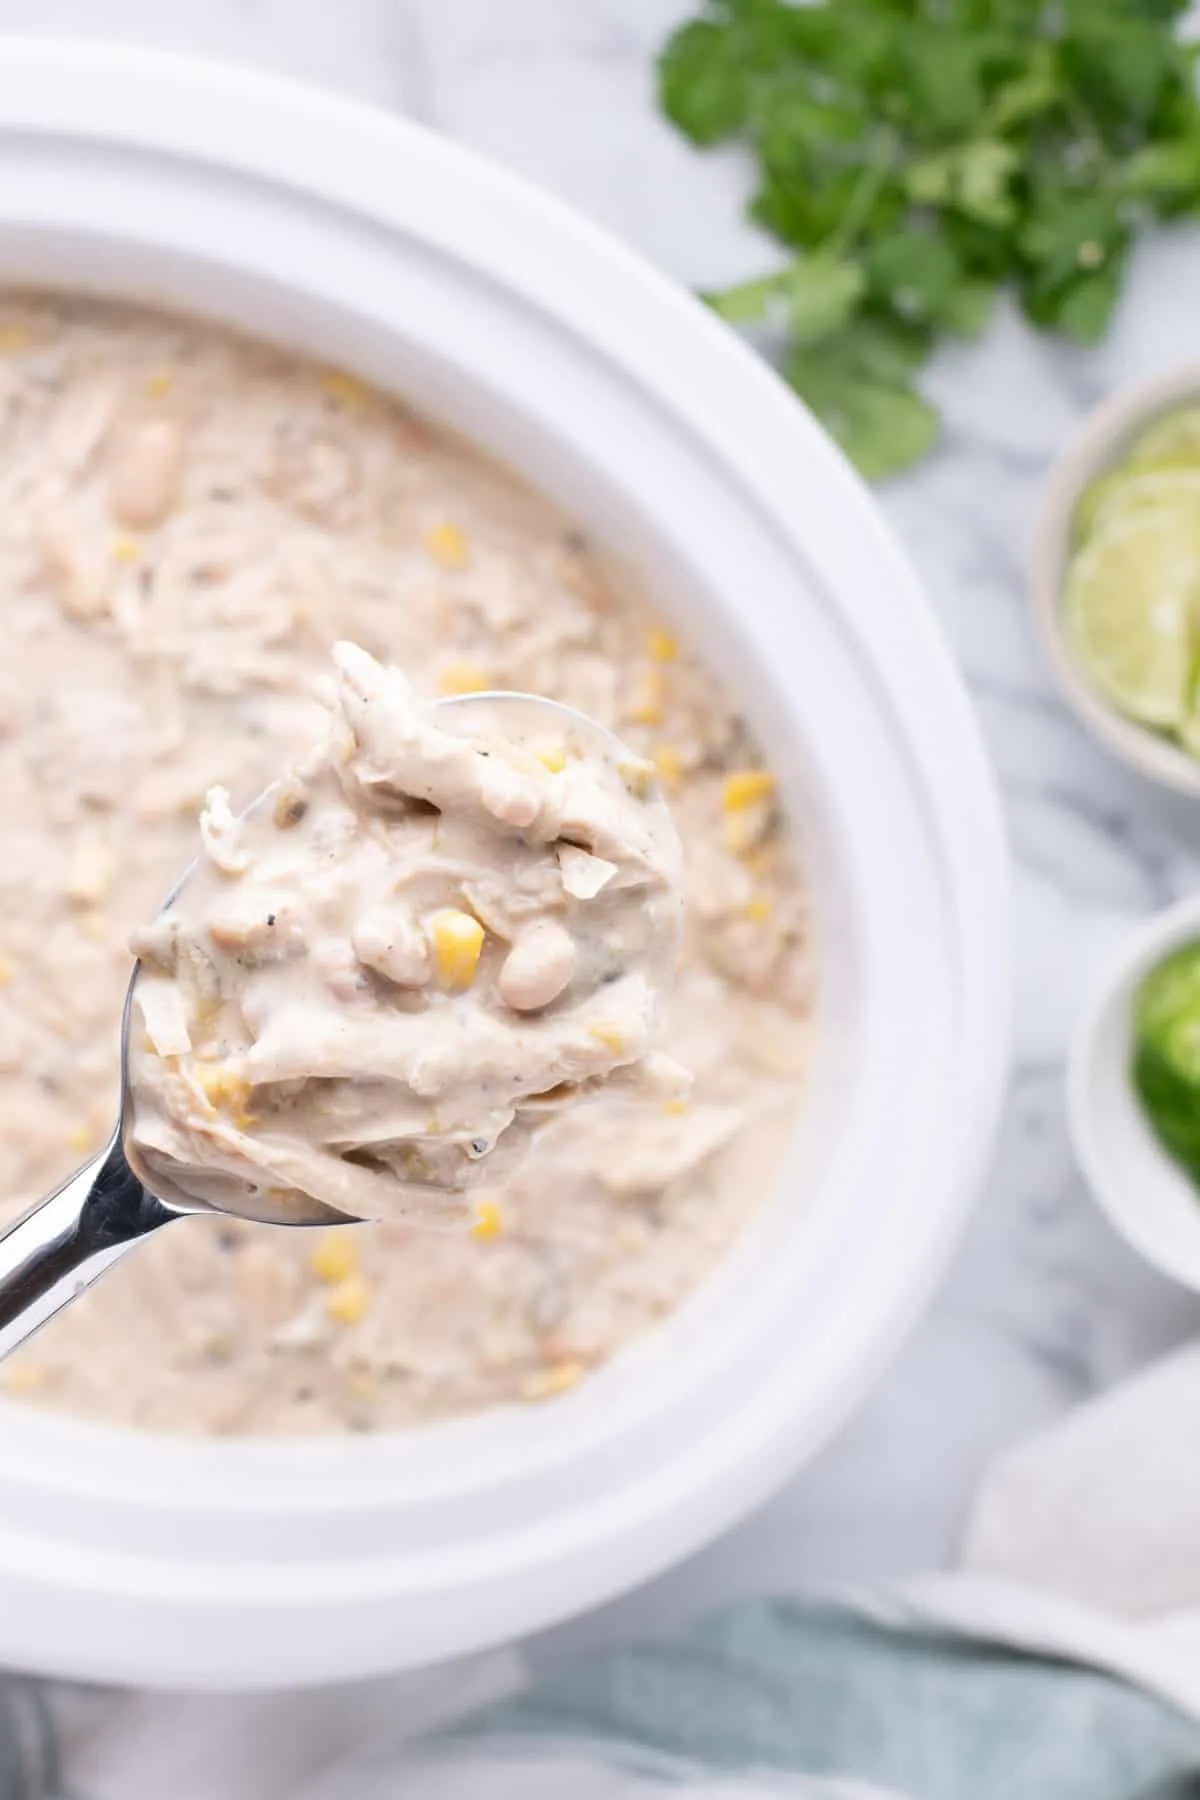 Crock Pot White Chicken Chili is a hearty slow cooker dinner recipe loaded with navy beans, chicken thighs, green chiles, corn, onions and spices.